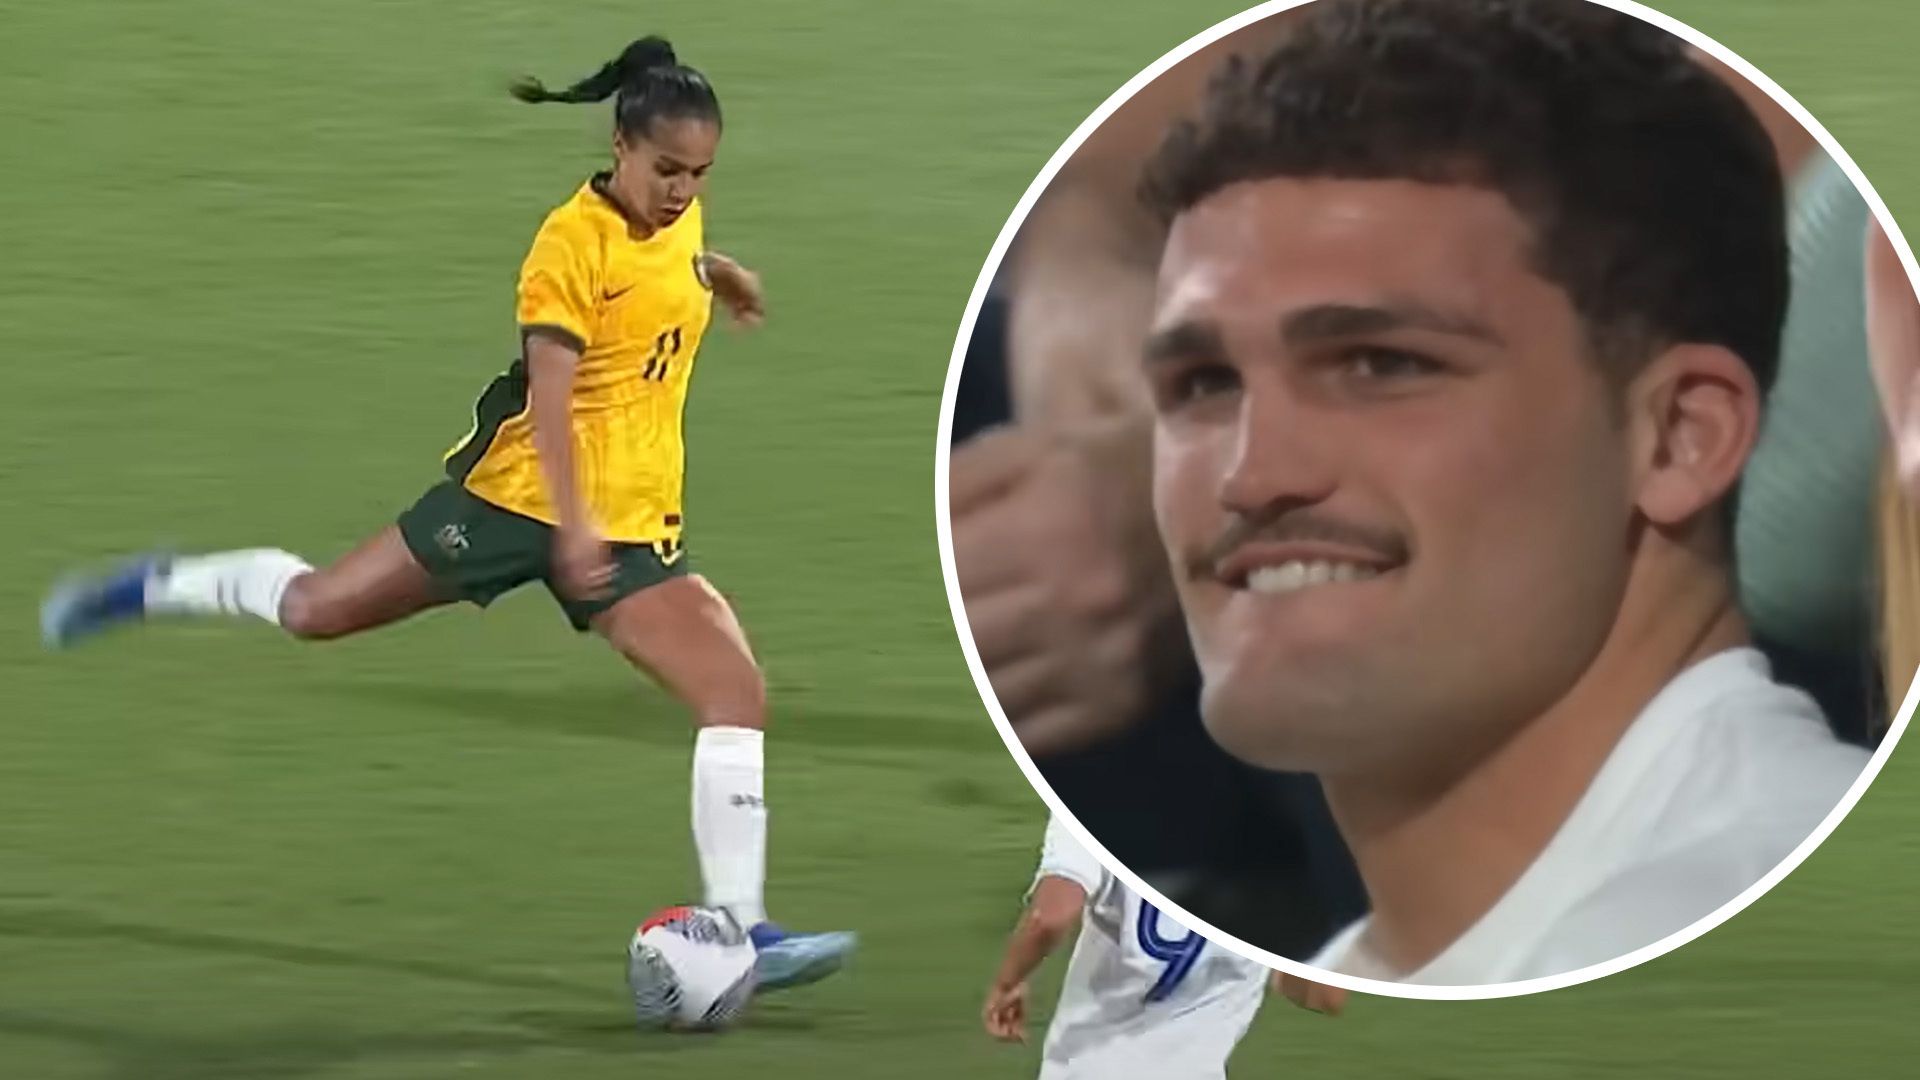 WATCH: Mary Fowler screamer turns heads as astonishing stat puts Sam Kerr in the shade